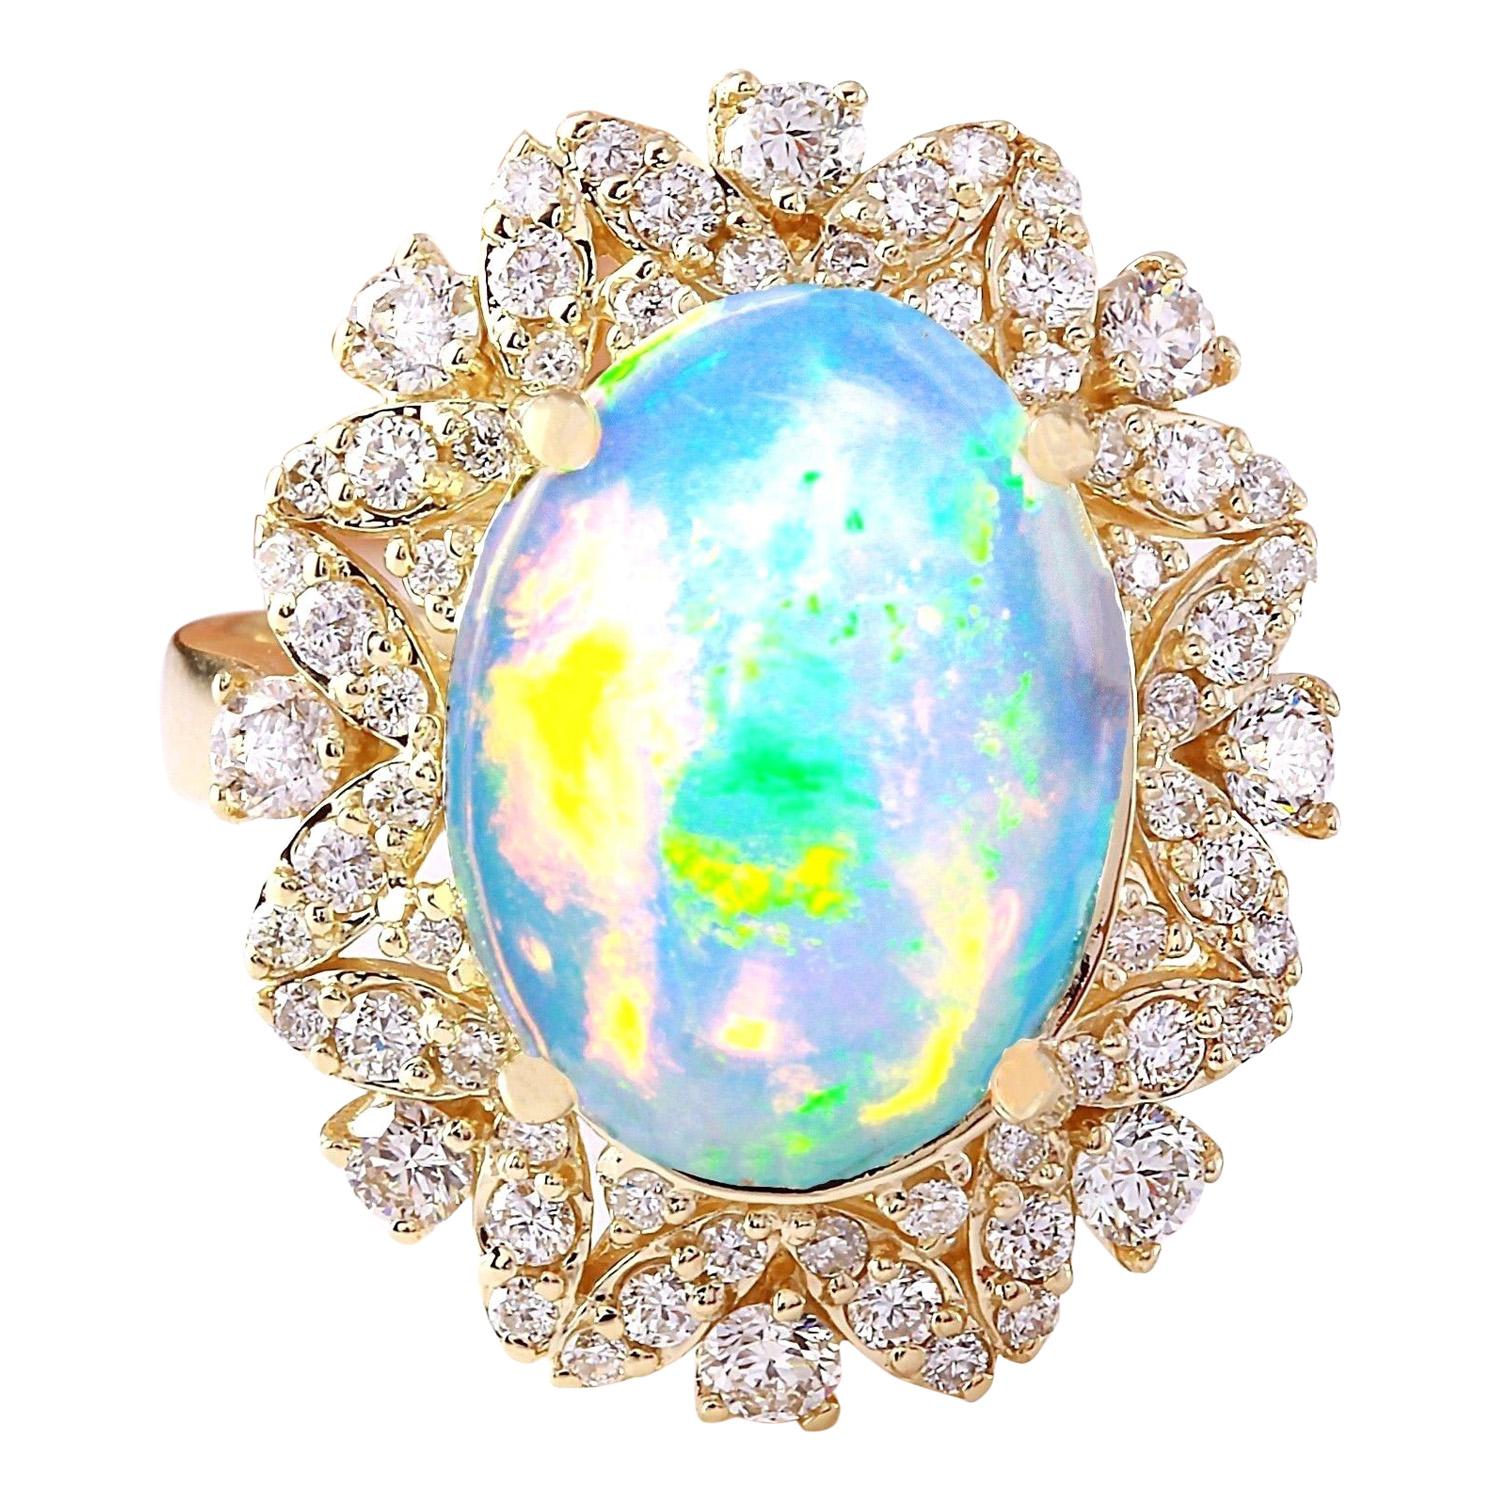 7.68 Carat Natural Opal 14K Solid Yellow Gold Diamond Ring
 Item Type: Ring
 Item Style: Cocktail
 Material: 14K Yellow Gold
 Mainstone: Opal
 Stone Color: Multicolor
 Stone Weight: 6.48 Carat
 Stone Shape: Oval
 Stone Quantity: 1
 Stone Dimensions: